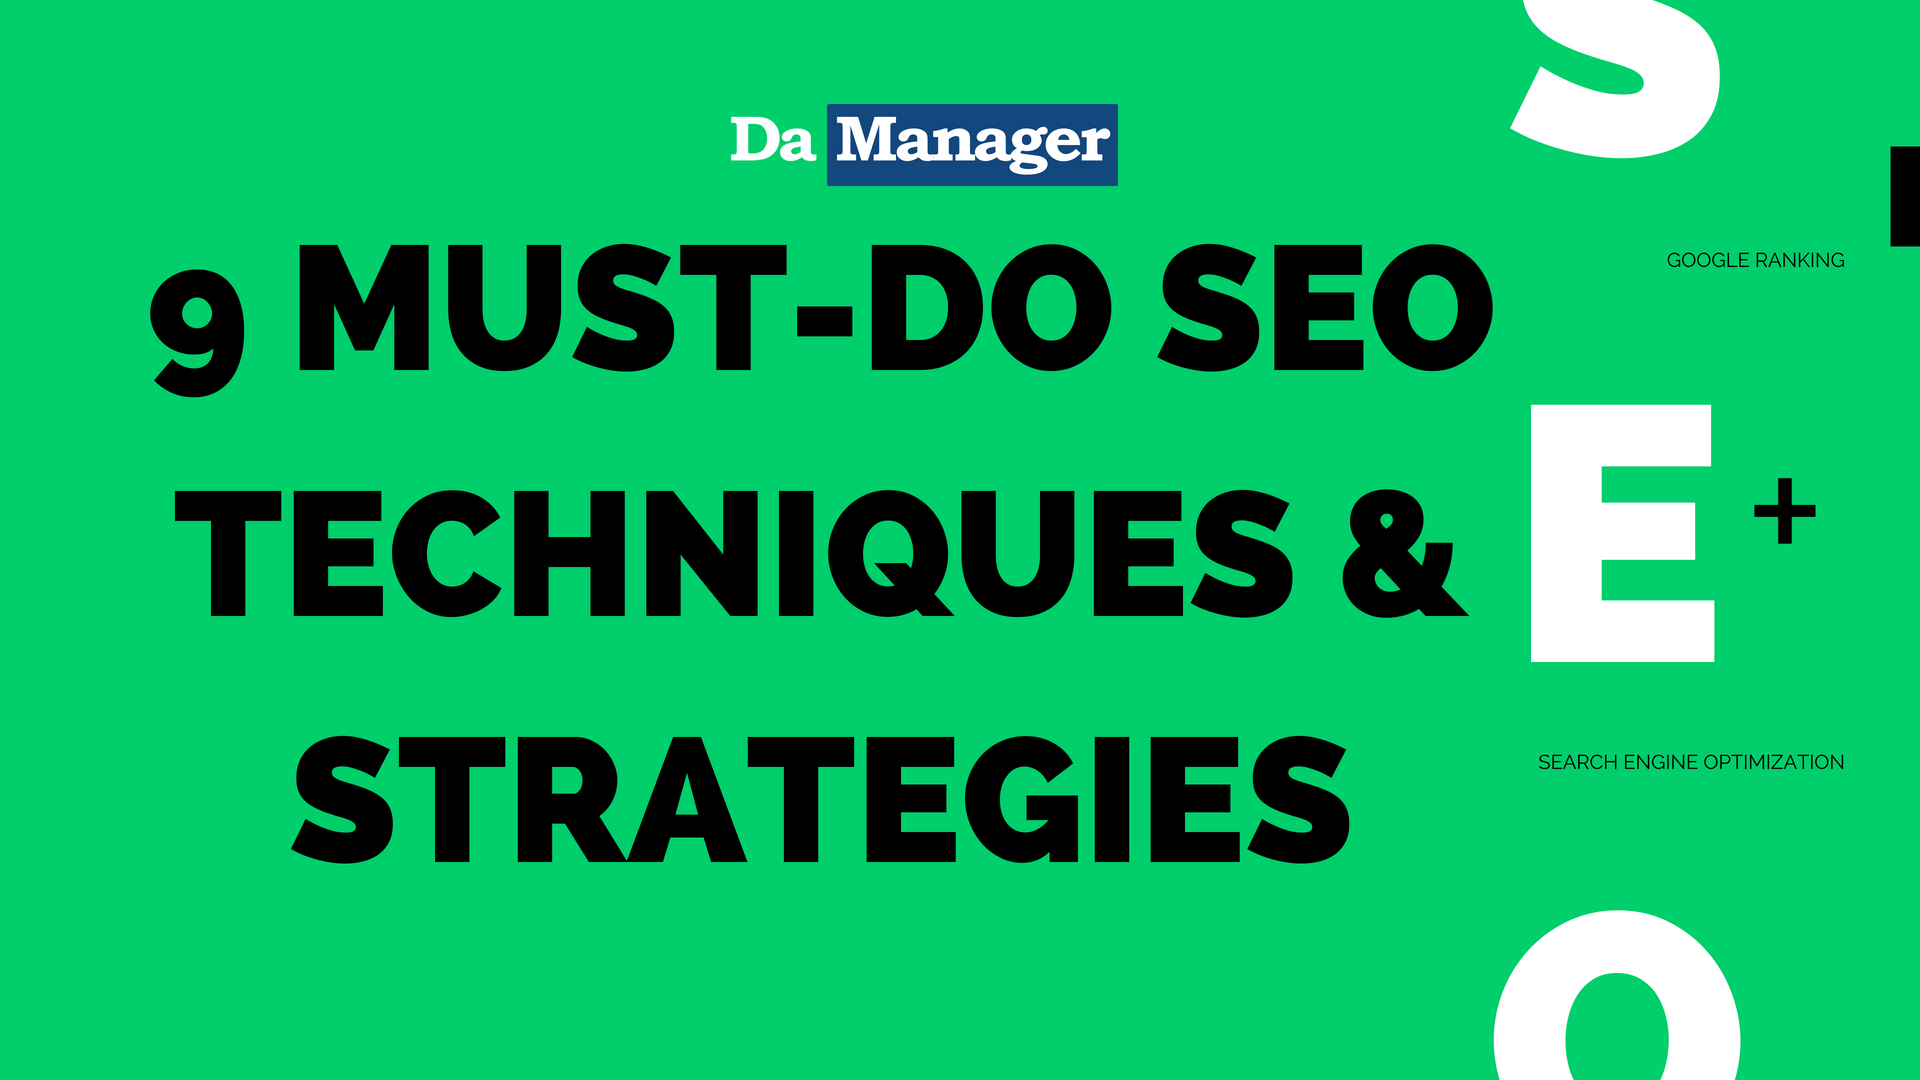 9 Must-do SEO Techniques & Strategies